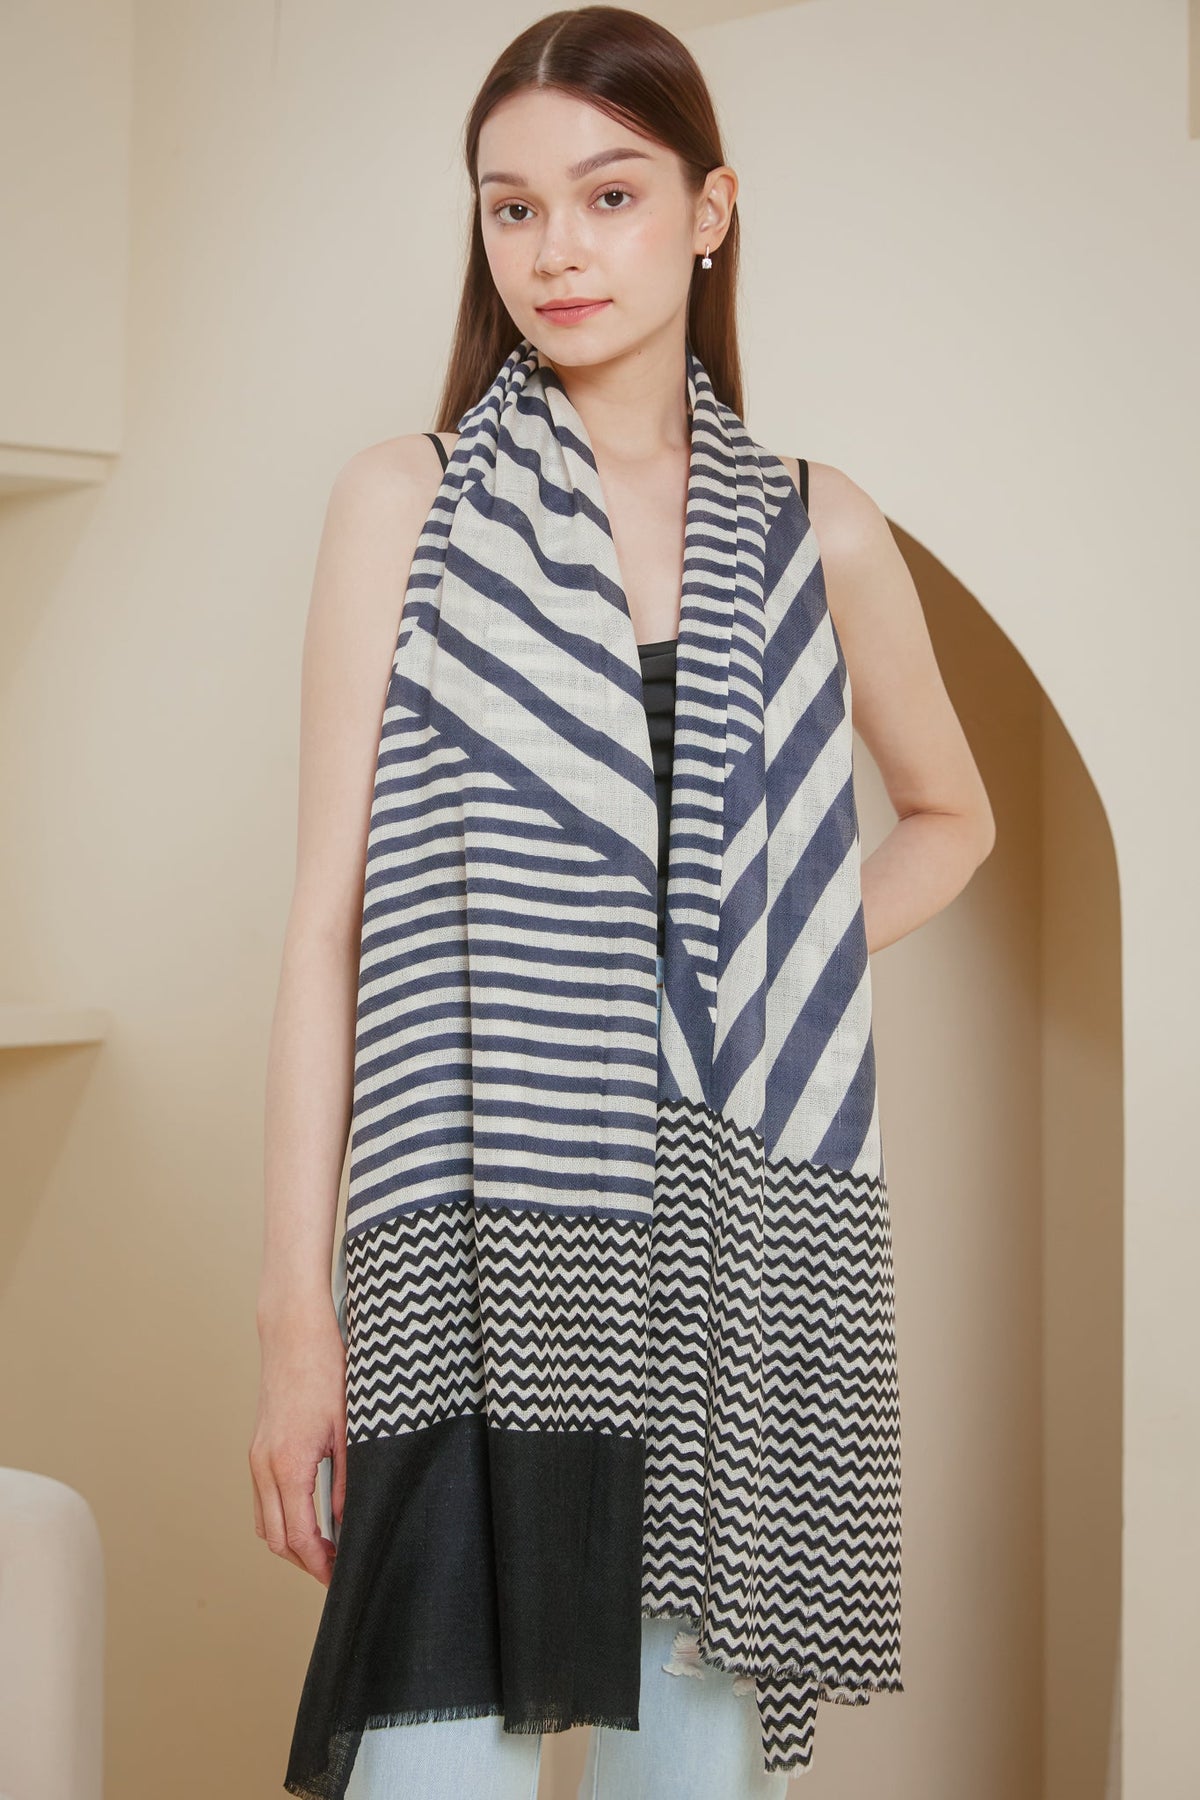 Backorder* Luxe Cashmere Shawl in Striped Navy